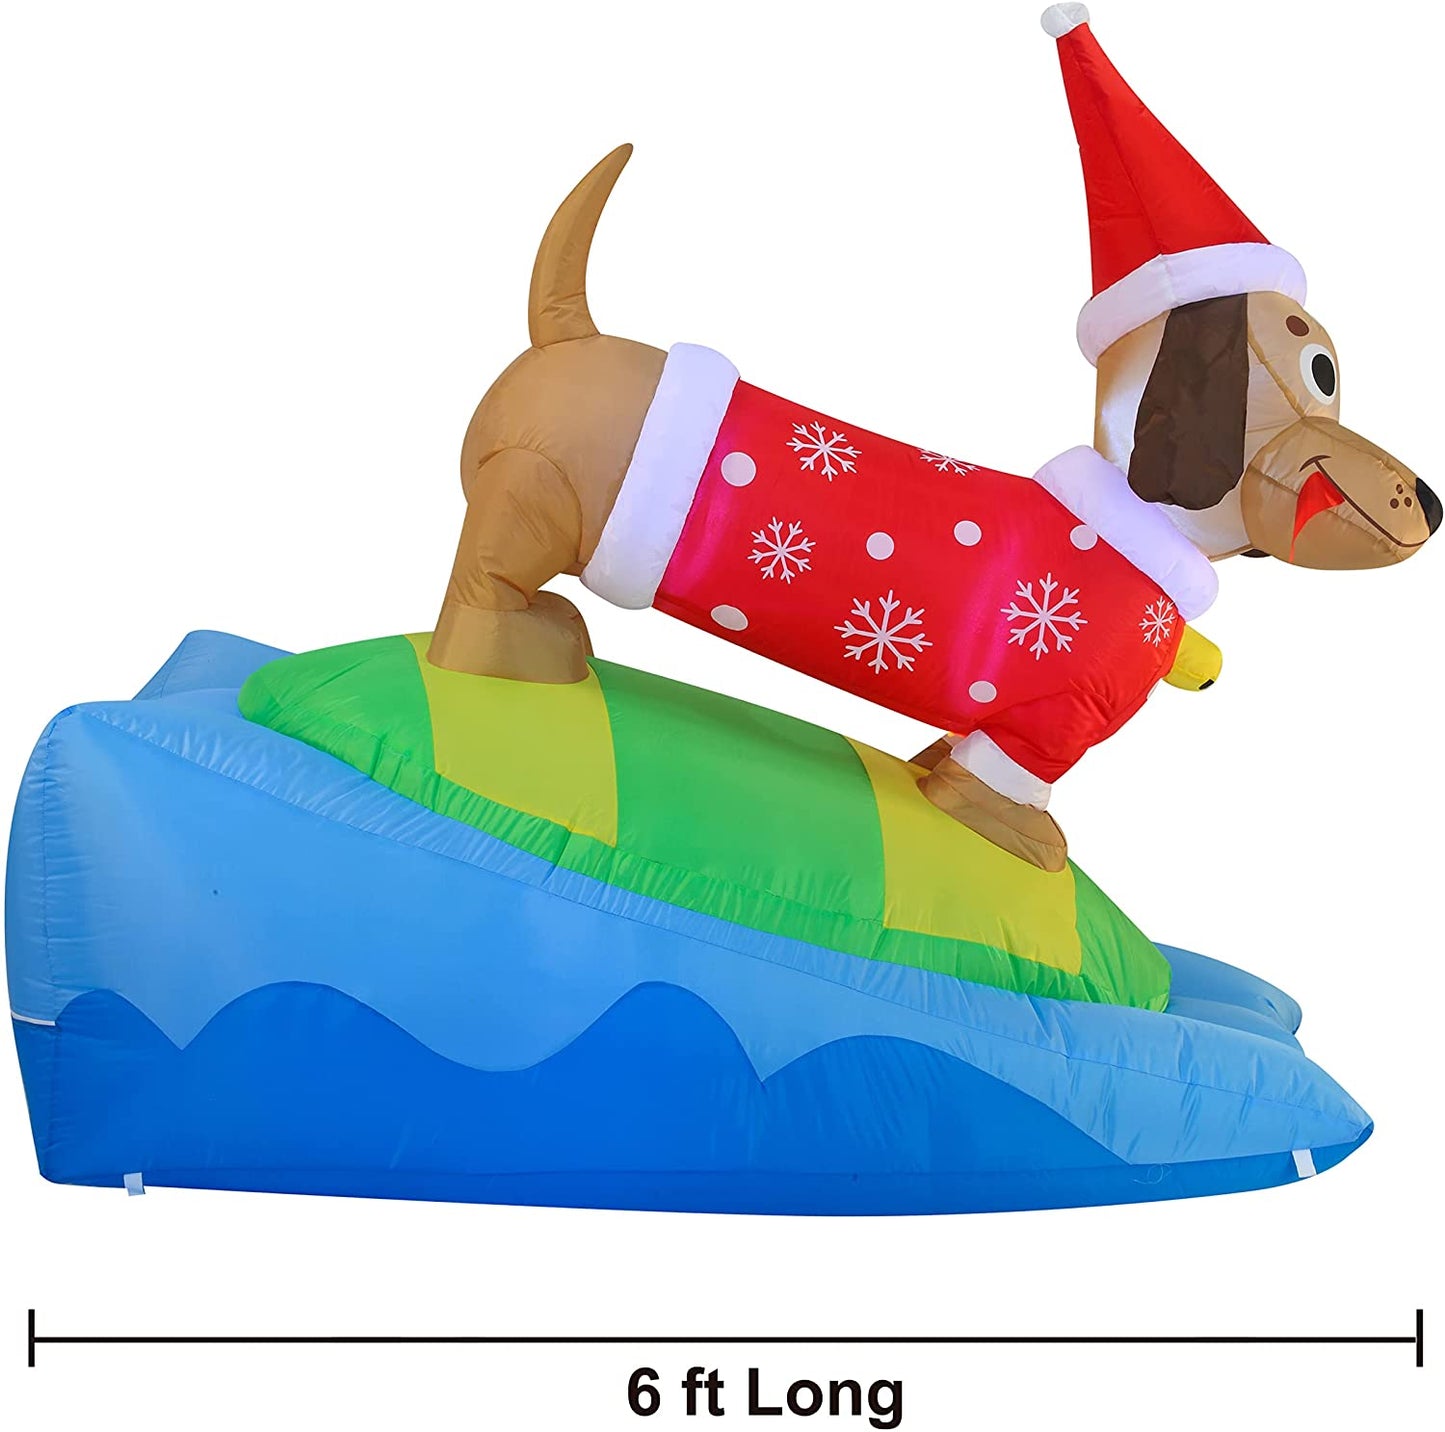 6 FT Long Inflatable Weiner Dog Snowboarding Christmas